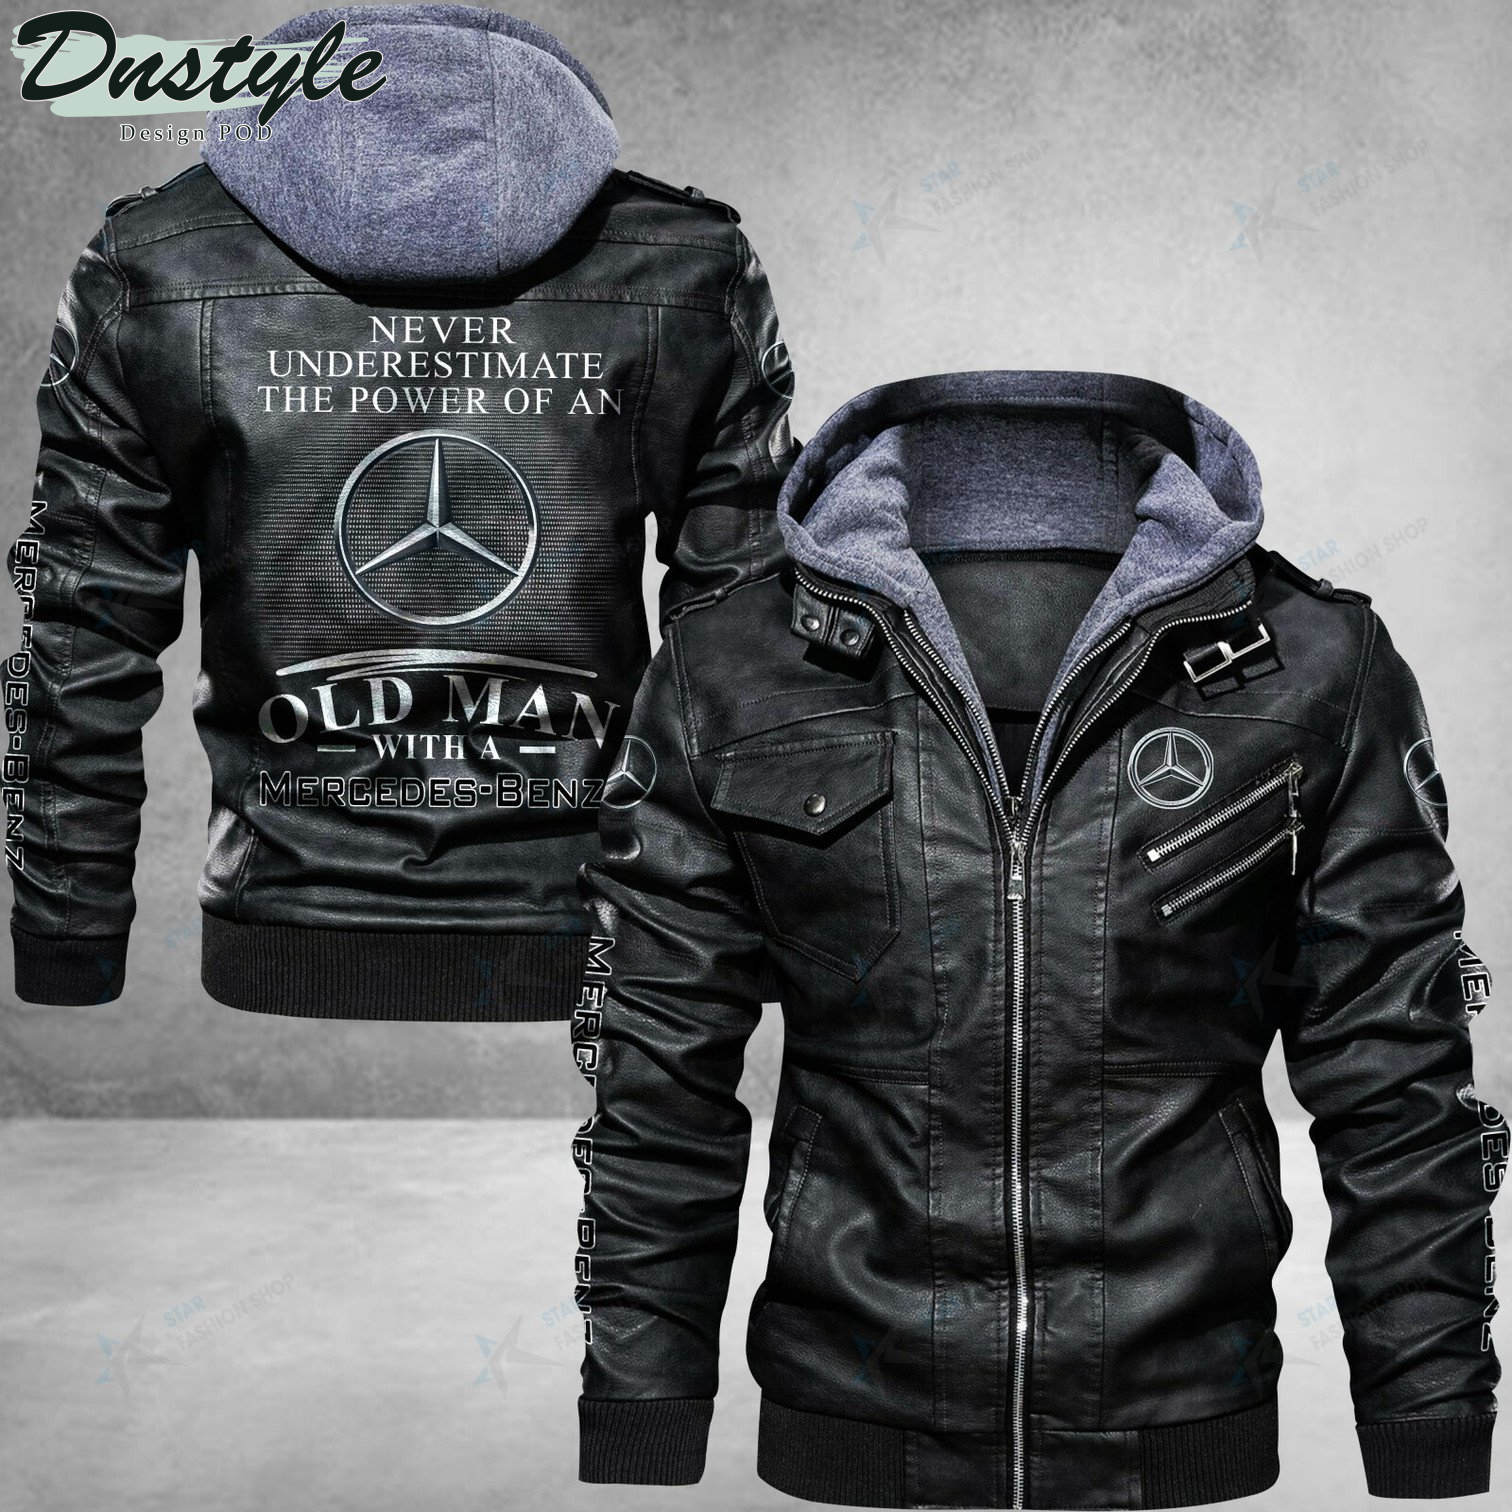 Mercedes-Benz never underestimate the power of an old man leather jacket